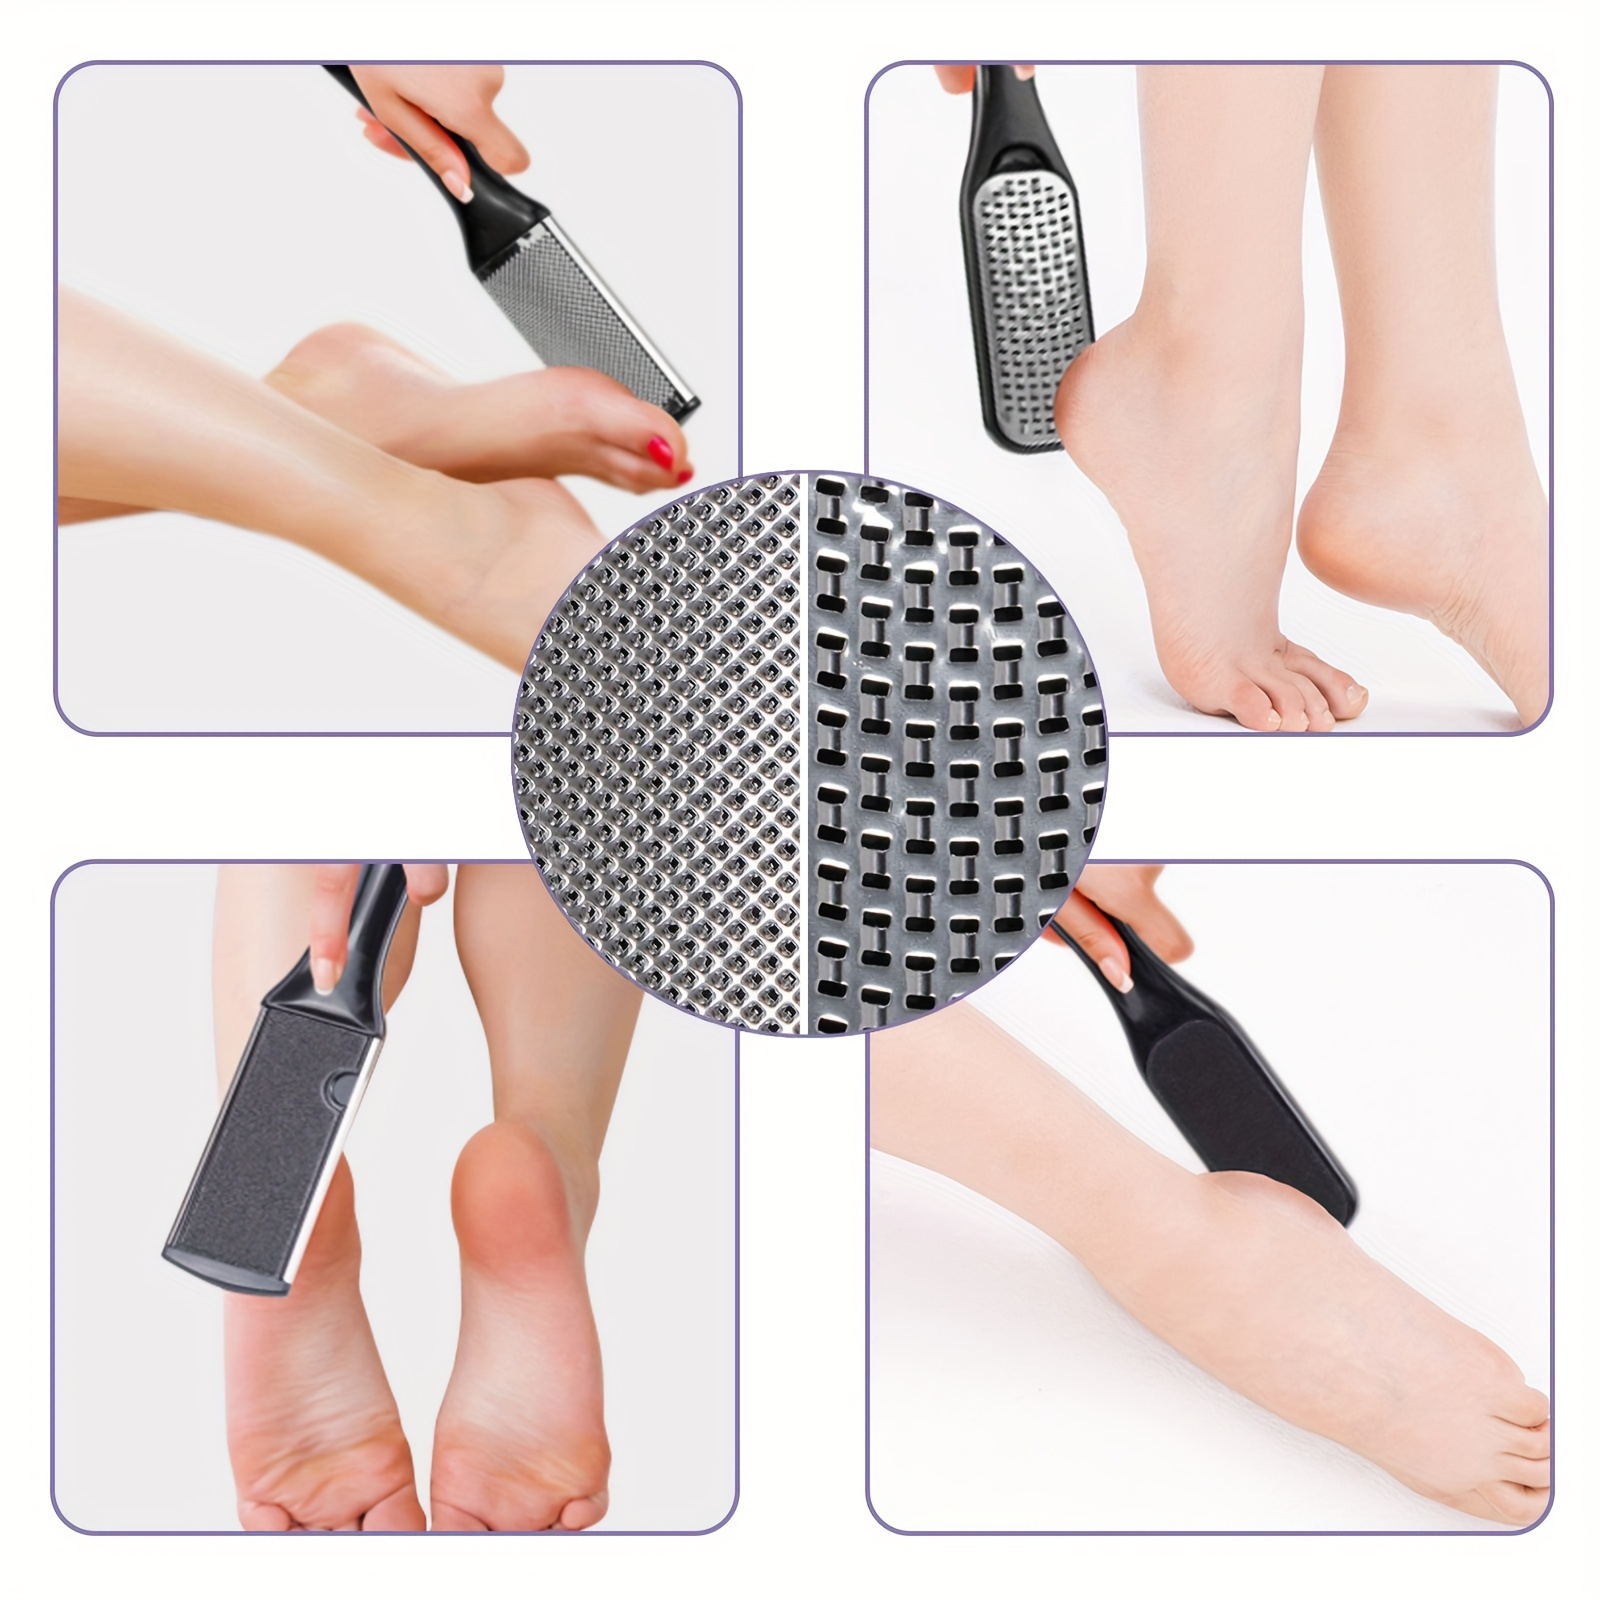 Stainless Steel Foot Rasp Callus Dead Skin Remover File Exfoliating  Pedicure Foot File Hard Dead Rough Skin Foot Care Tool Set